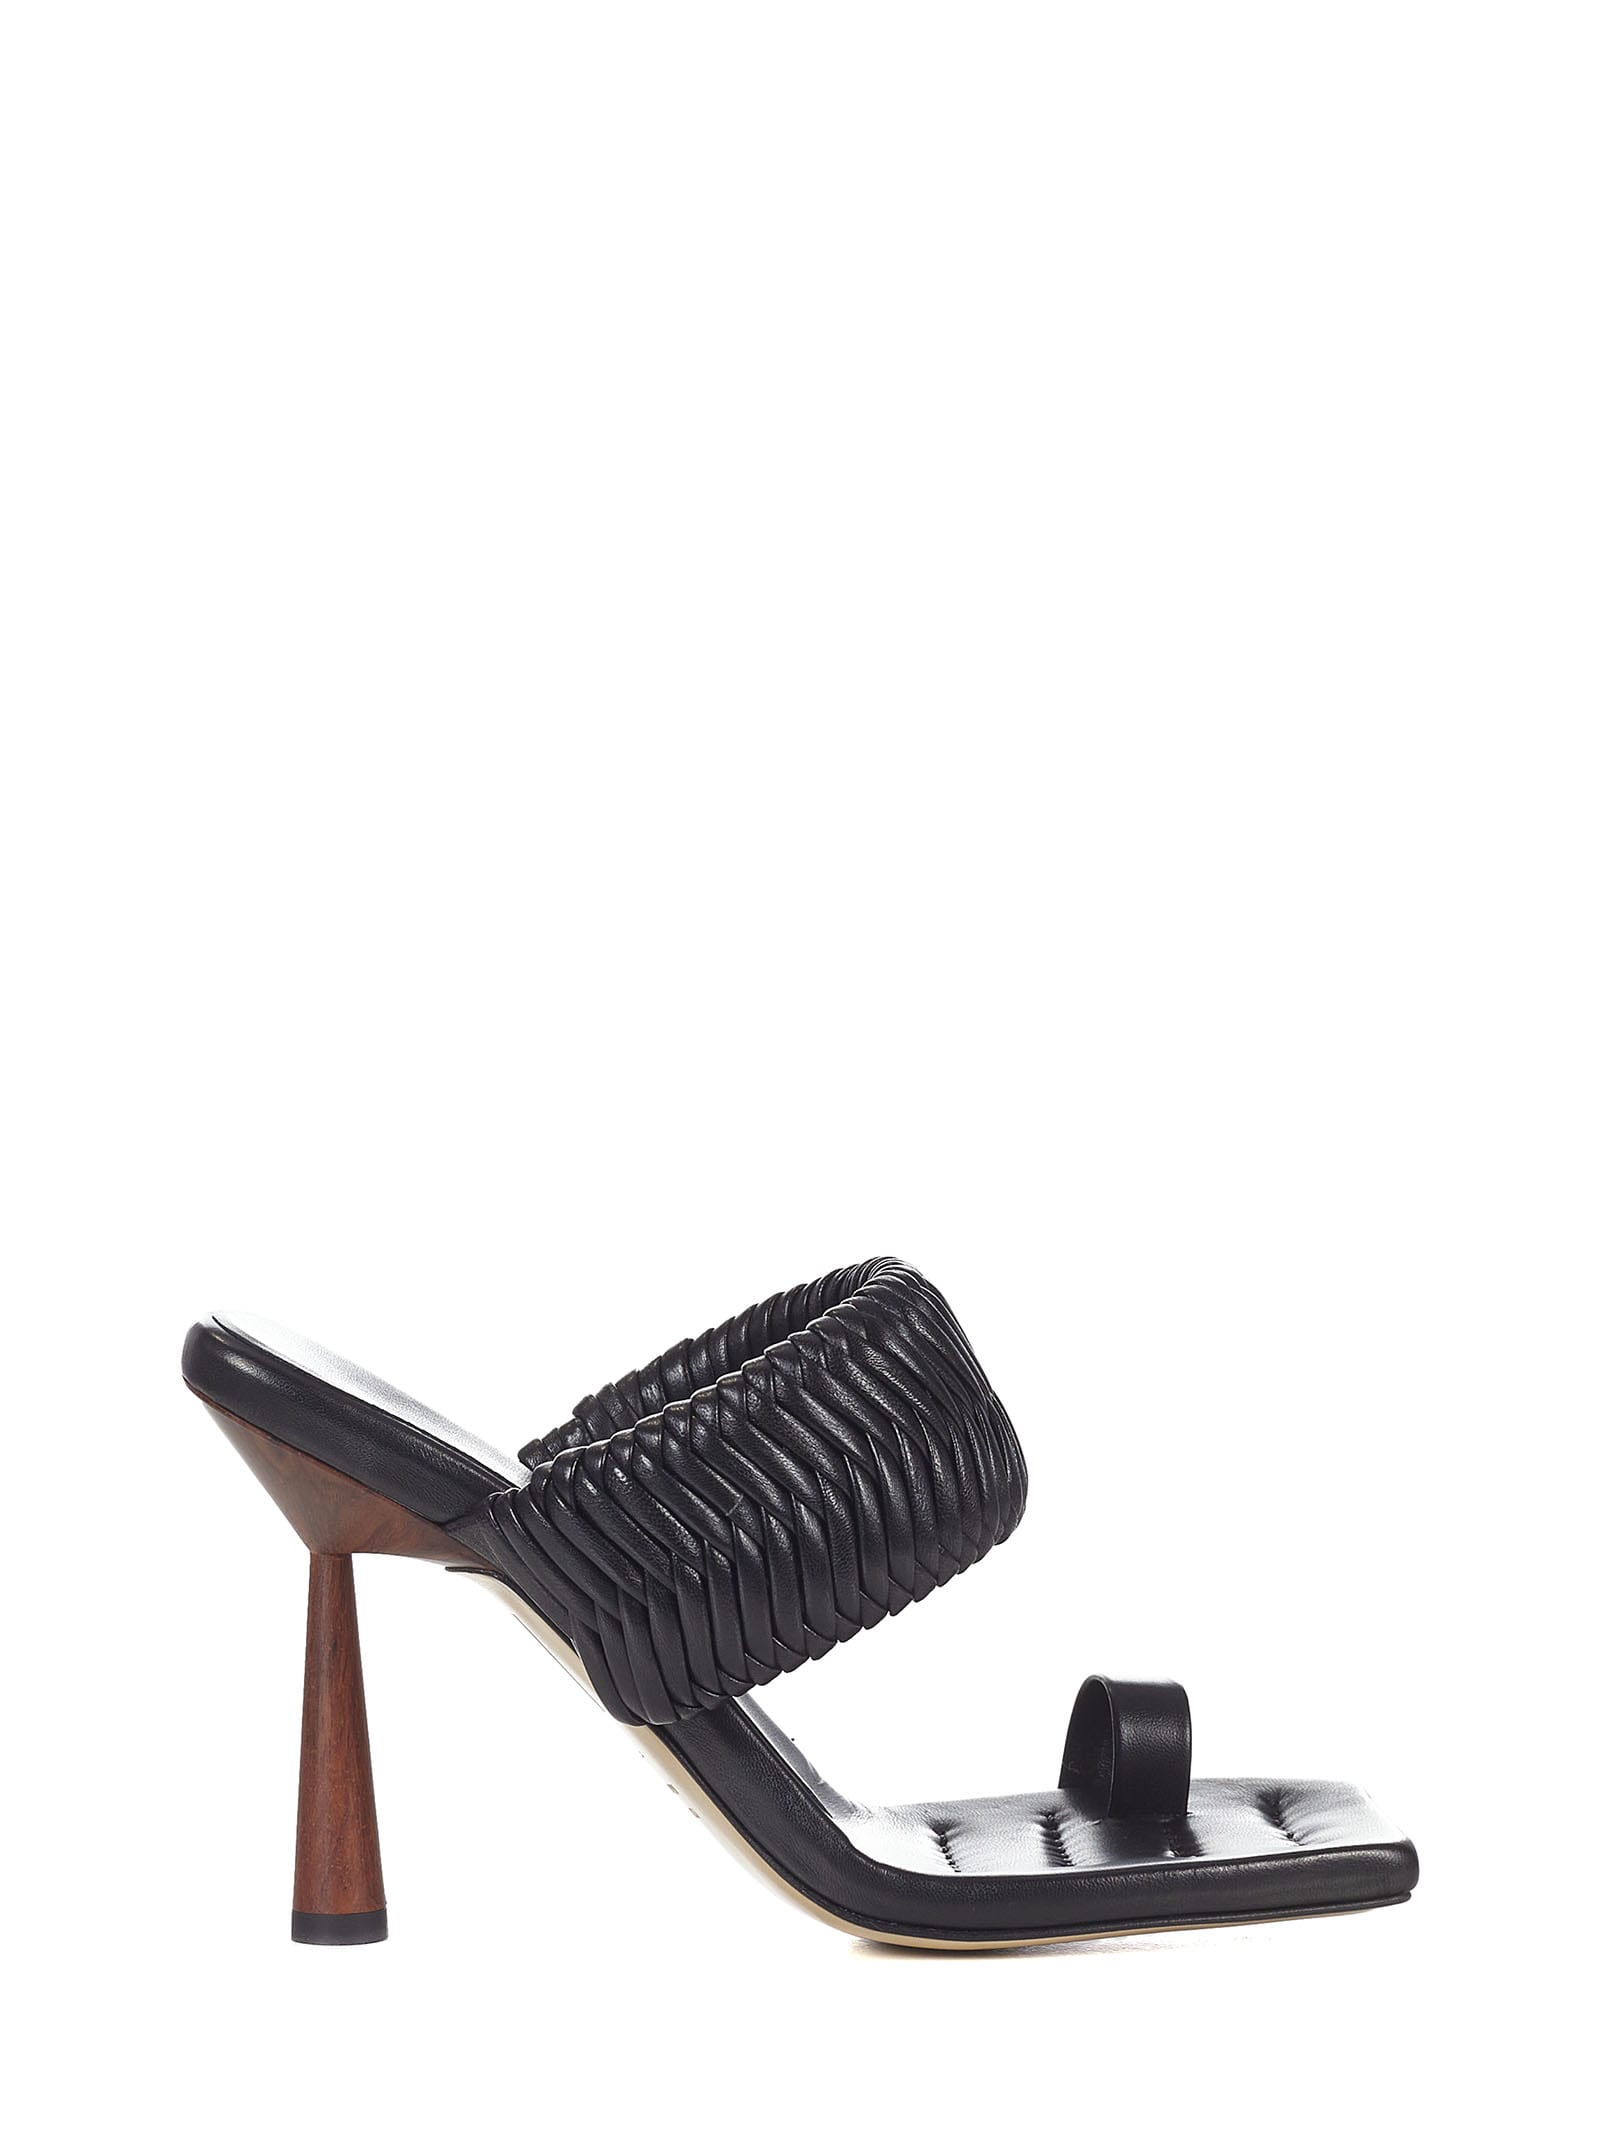 Gia Couture/rhw Rosie 1 Sandals